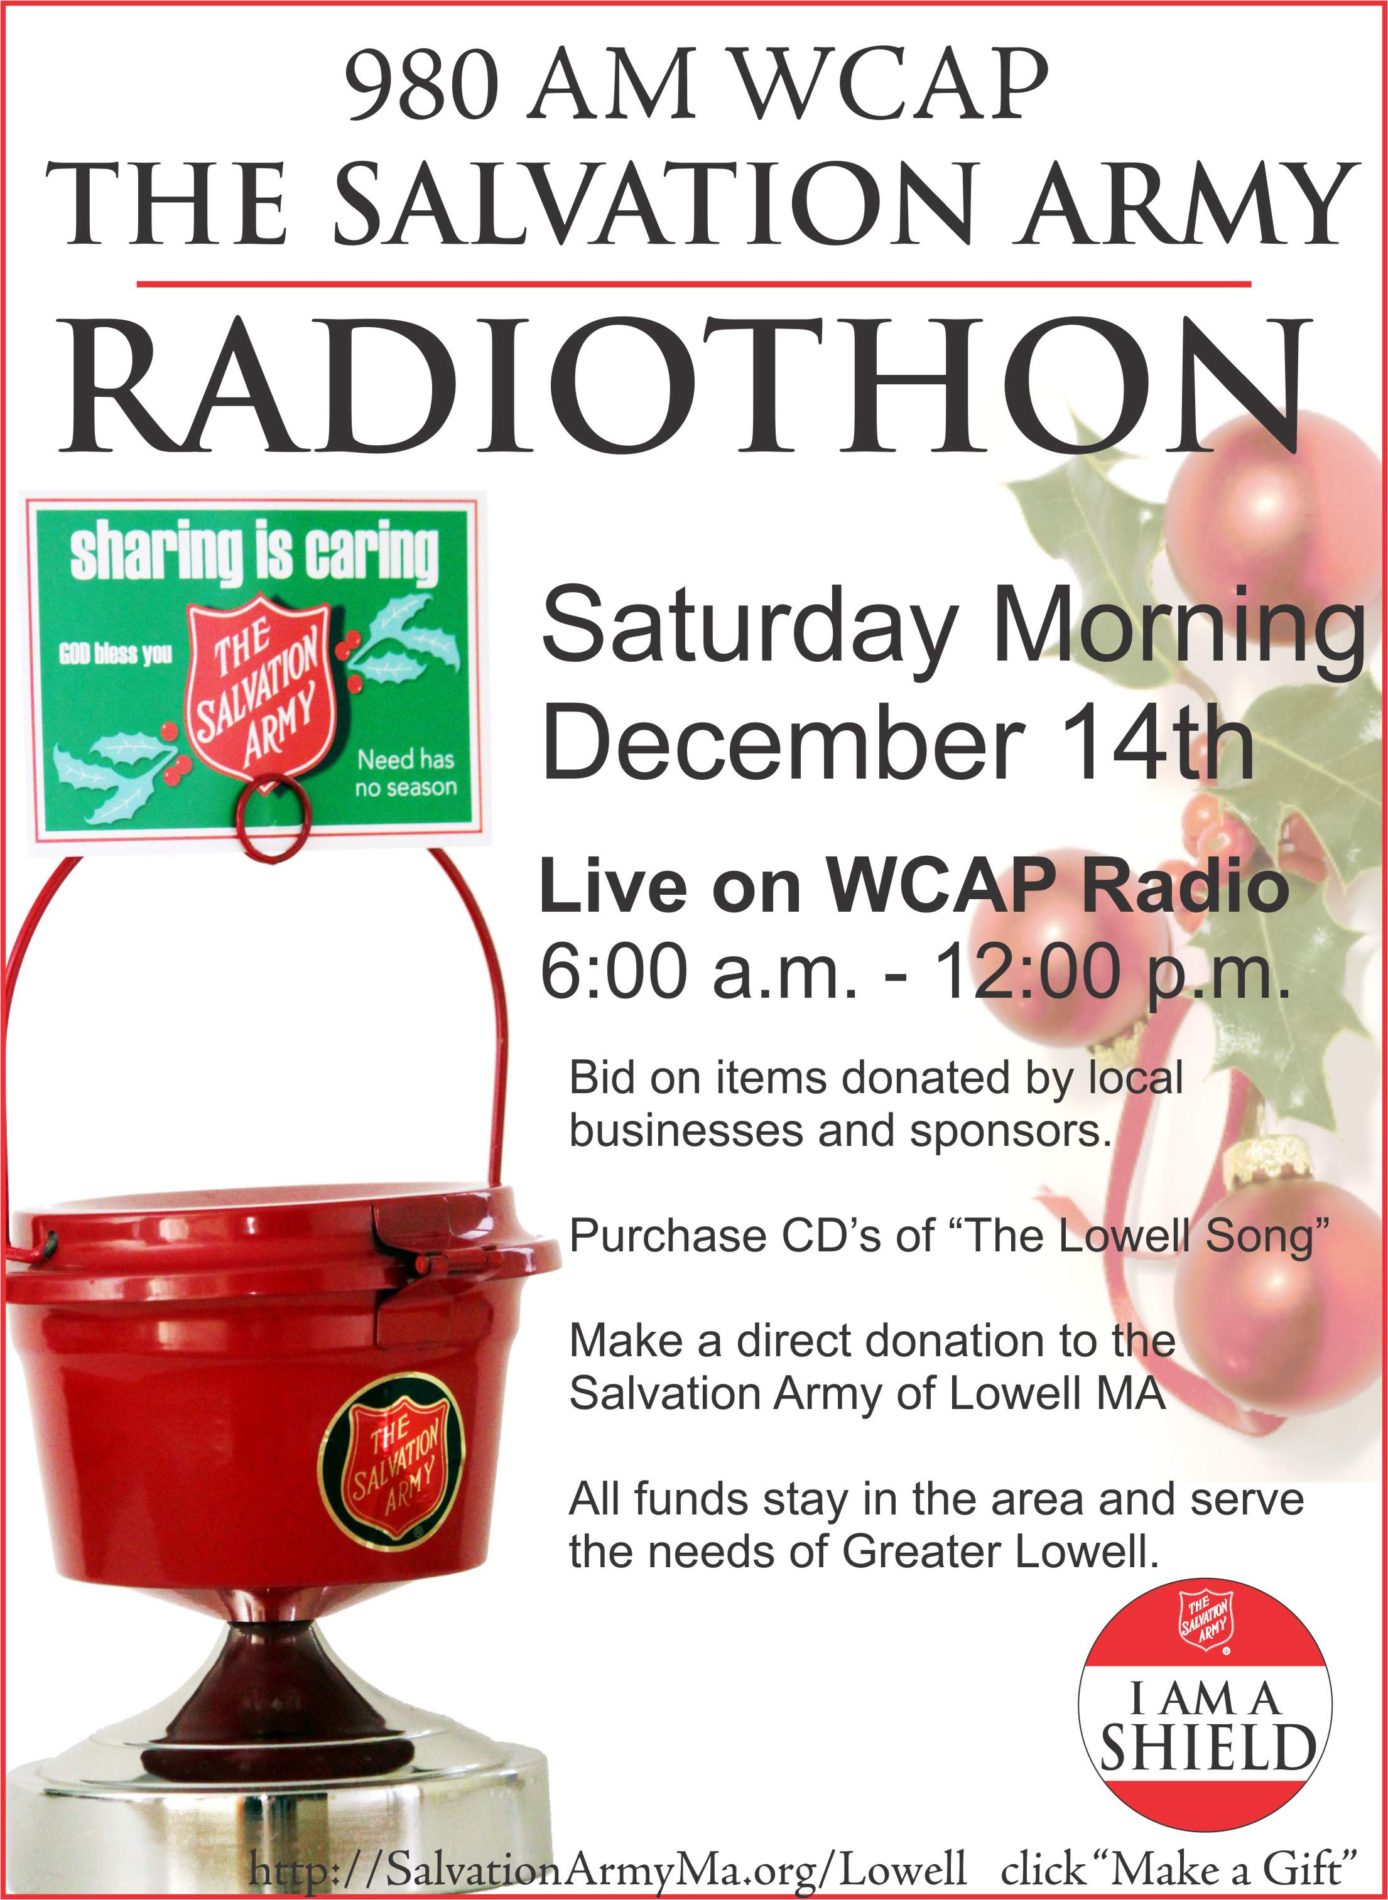 Salvation Army Radiothon 980 AM WCAP Greater Lowell Chamber of Commerce